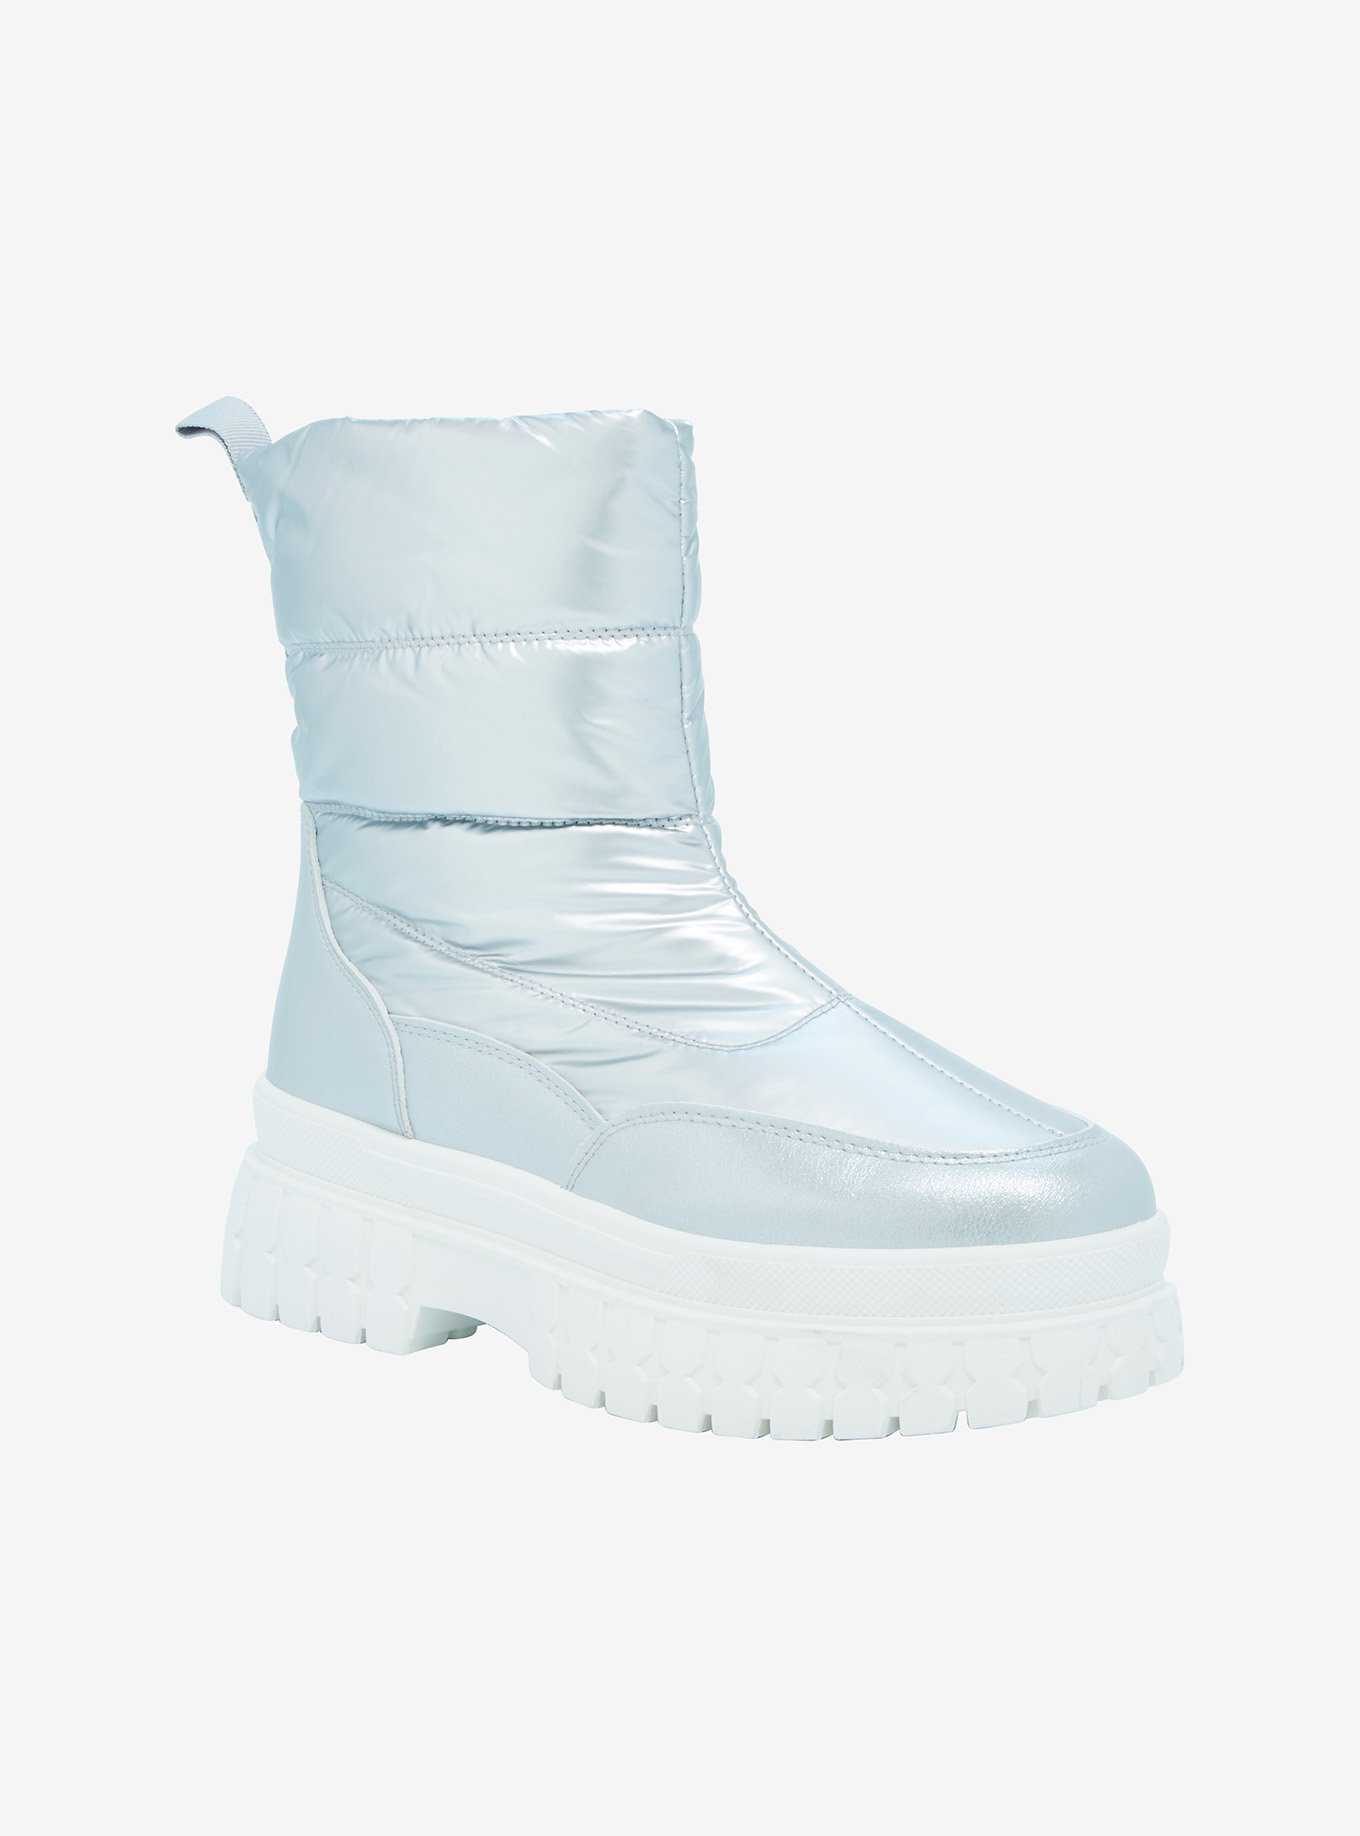 Dirty Laundry Chrome Puffer Boots, , hi-res